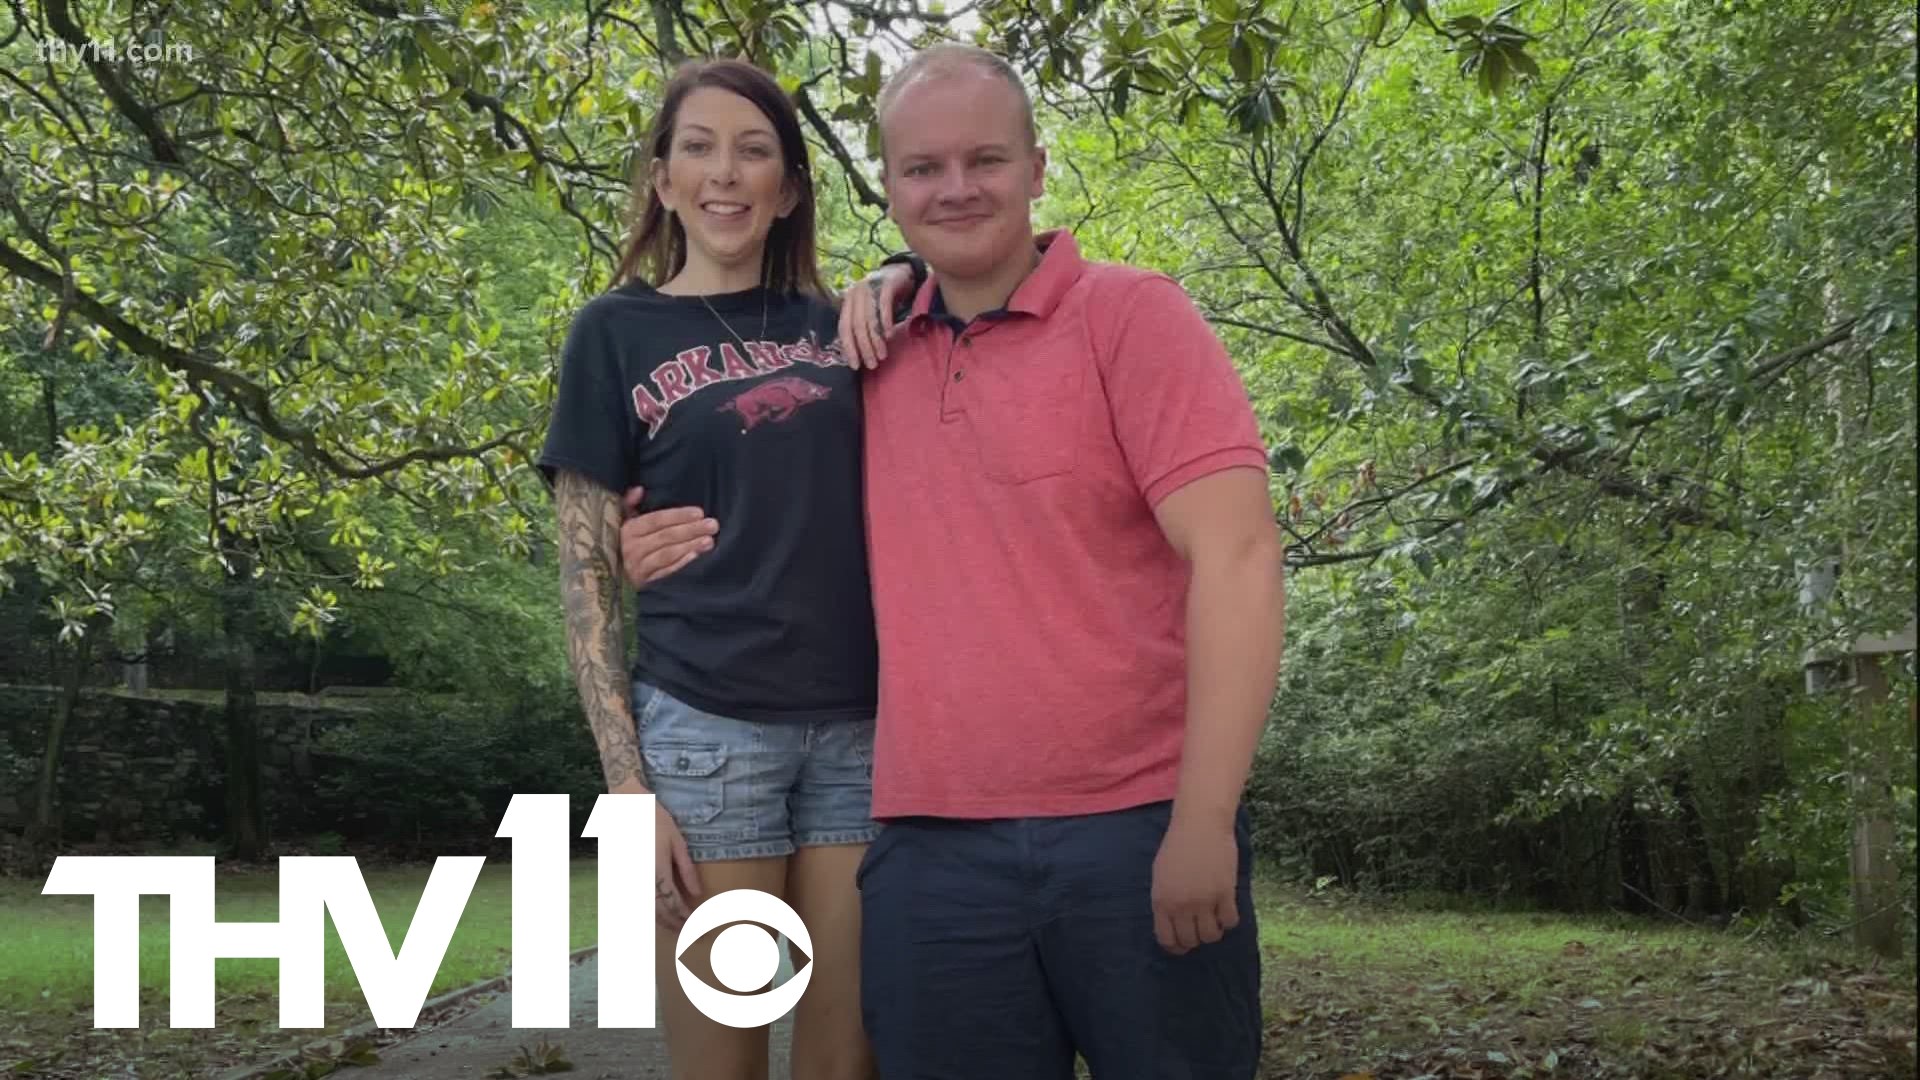 An Arkansas woman recently faced with the challenge of needing a stem cell transplant has been given the opportunity to thank the stranger who helped save her life.